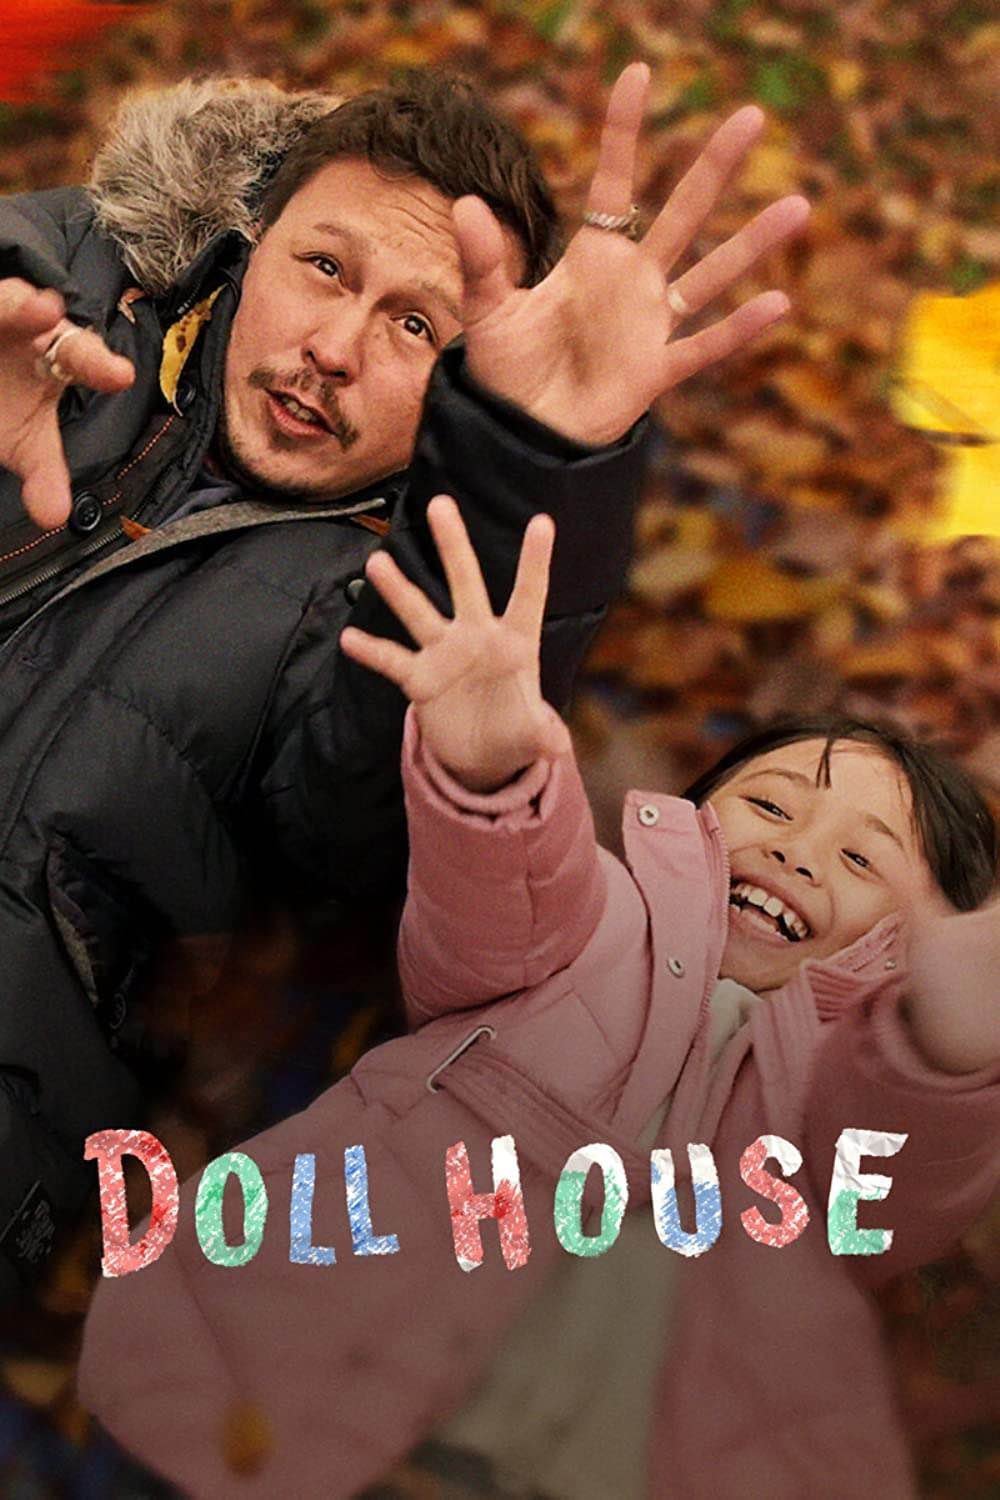 Tagalog poster of the movie Doll House